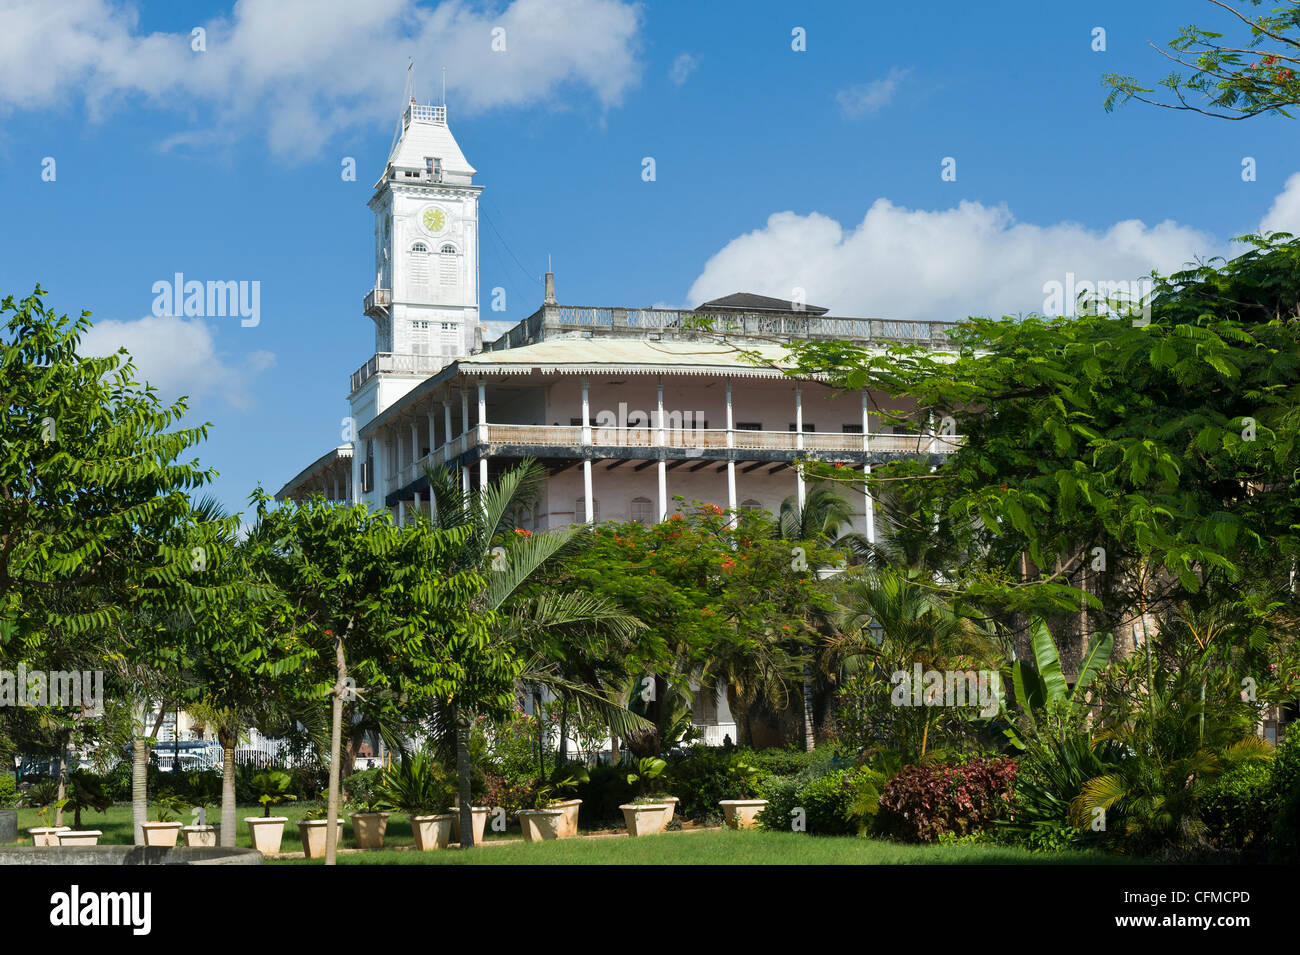 'House of Wonders' built in 1880s was the first building to have electricity in Stone Town Zanzibar Tanzania Stock Photo